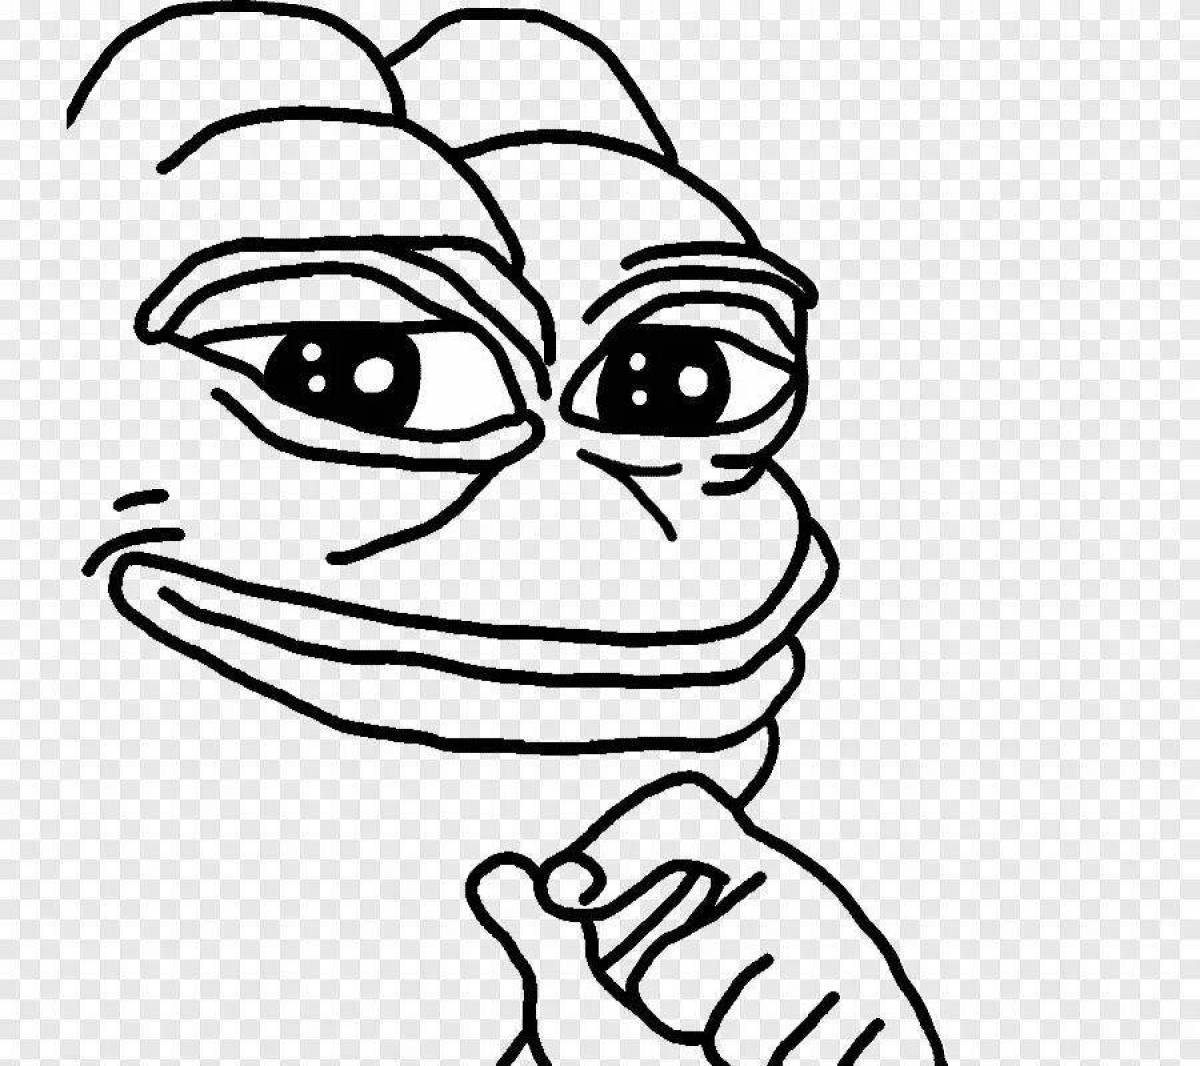 Pepe the frog's funny coloring book